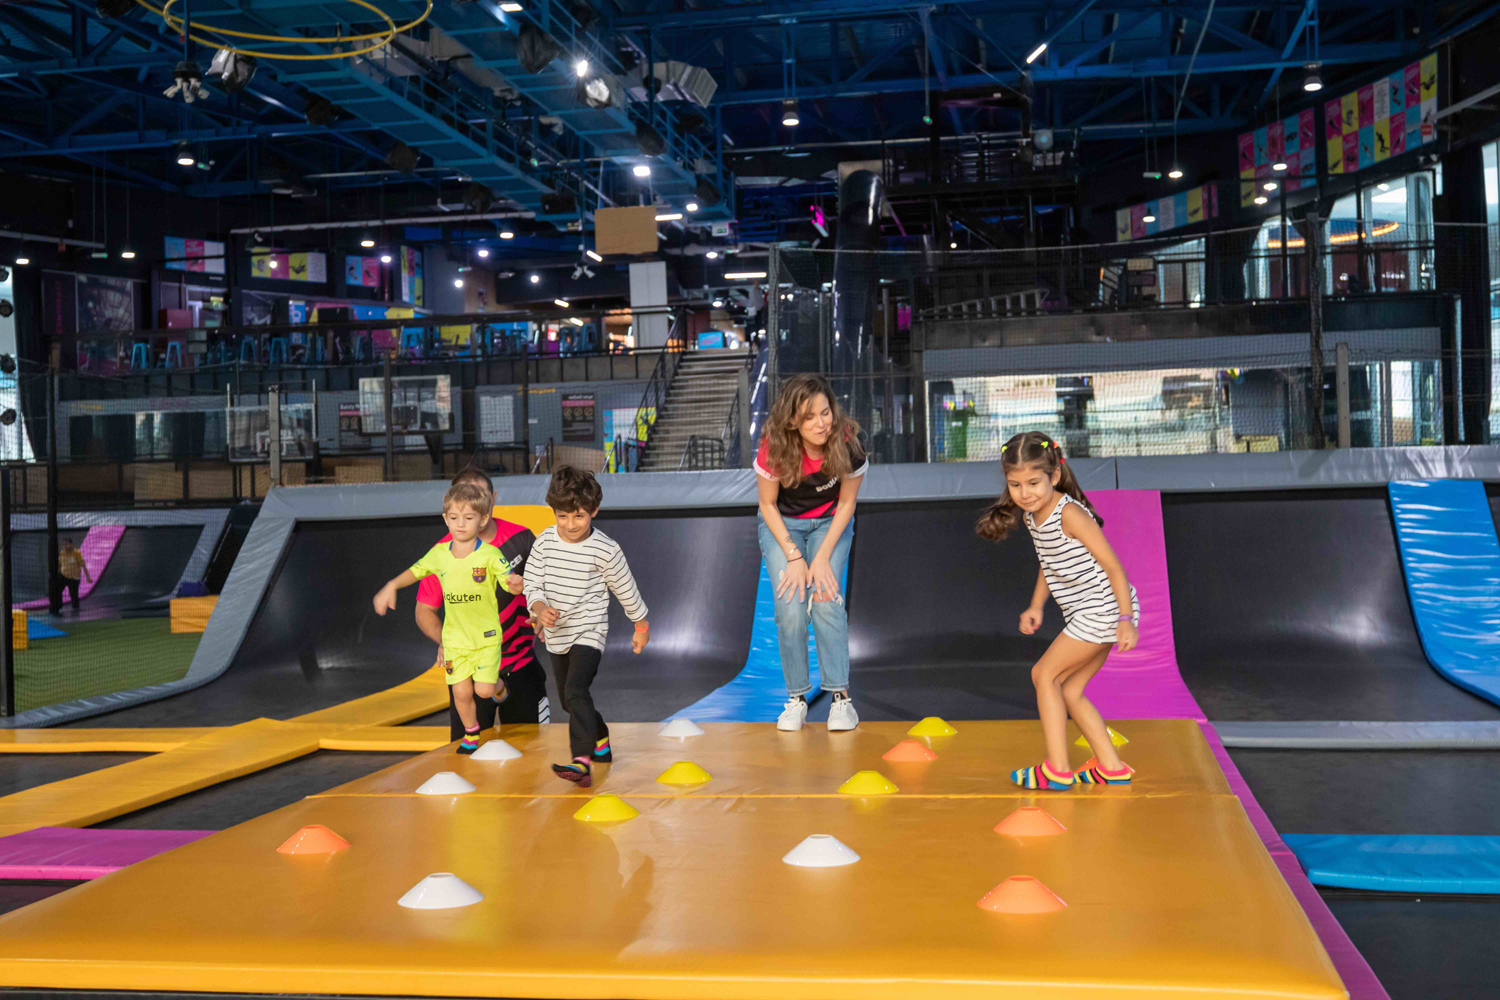 BOUNCE UAE introduces a parkour course for kids | Things To Do, Kids